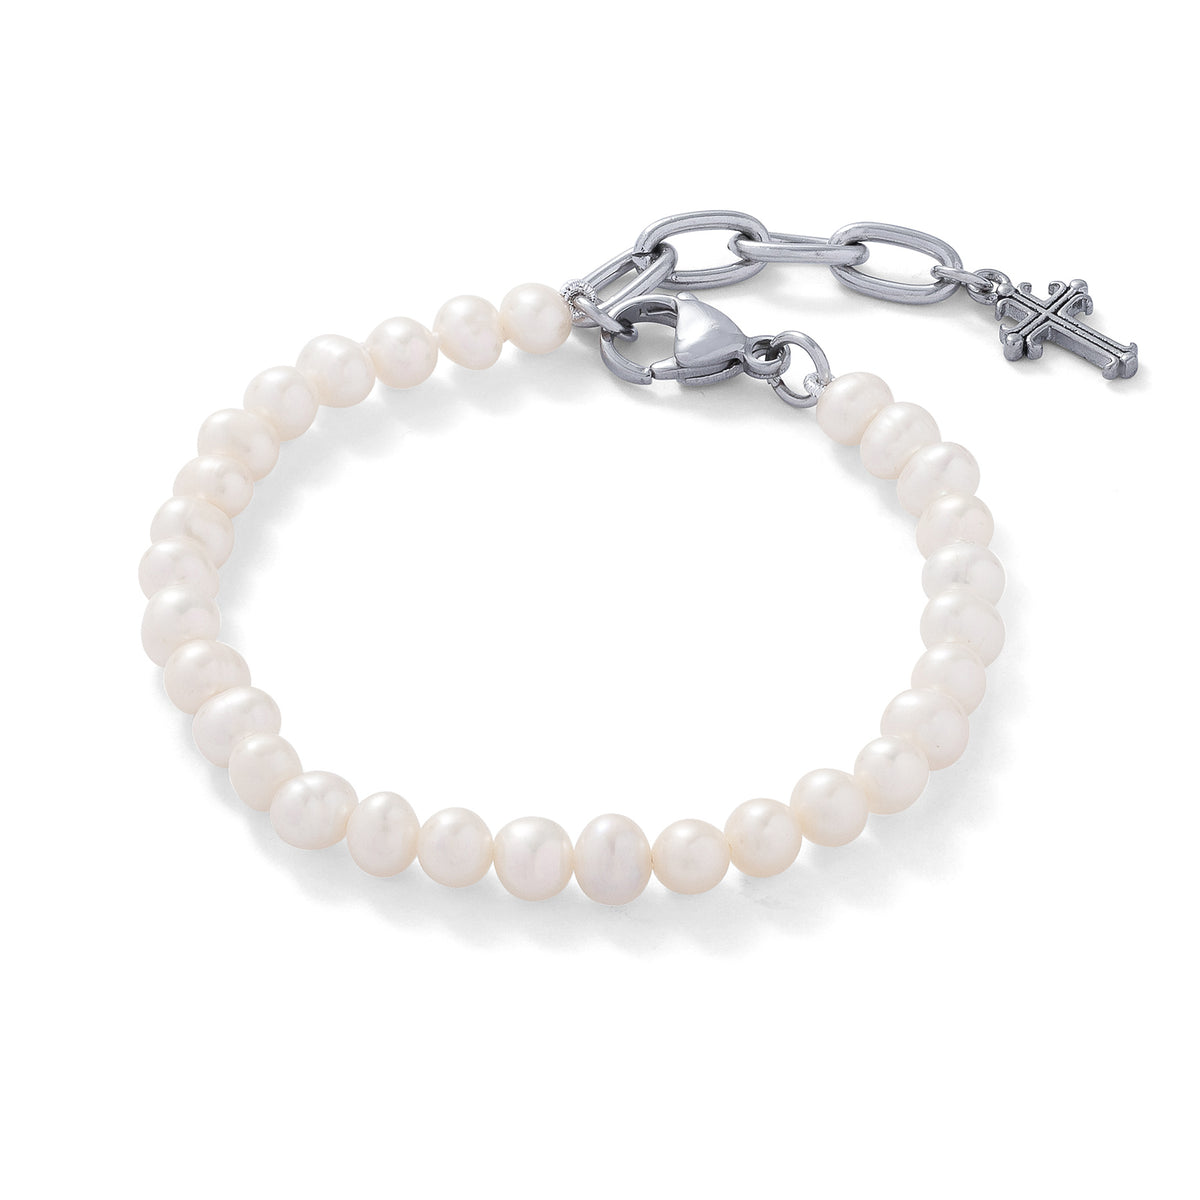 5mm pearl bracelet with 5cm chain extender